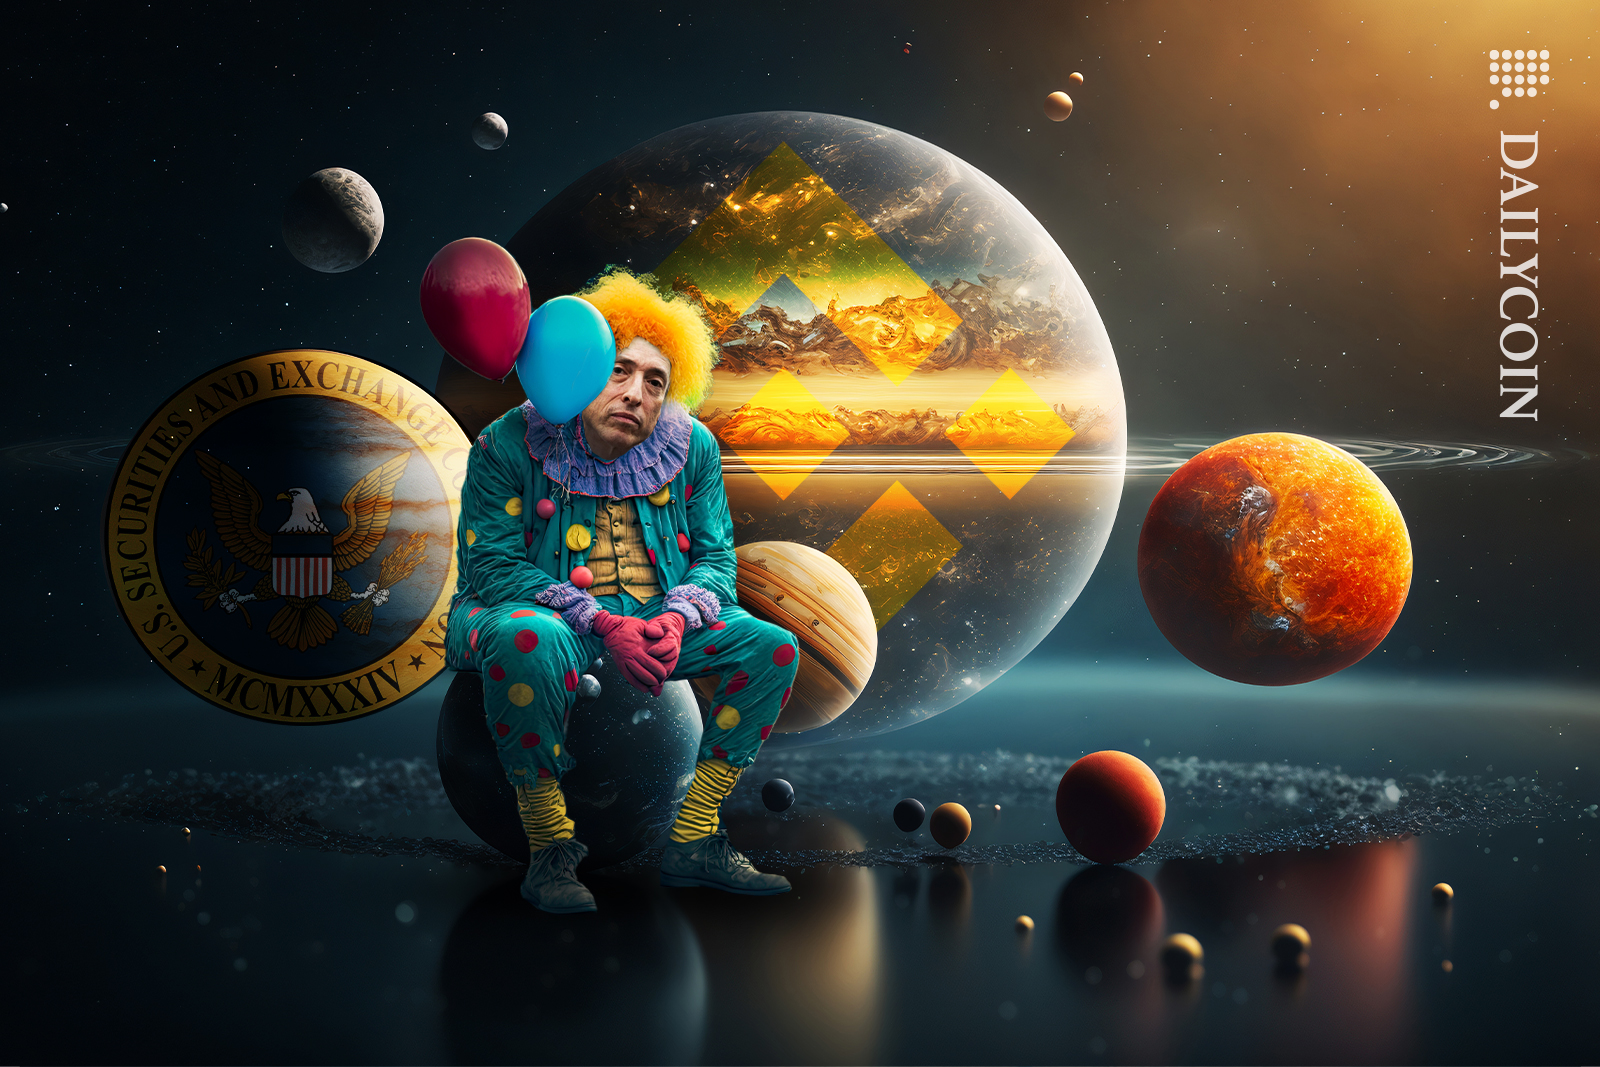 SEC chairman Gary Gensler dressed as a clown sitting in outer space in front of a Binance planet.